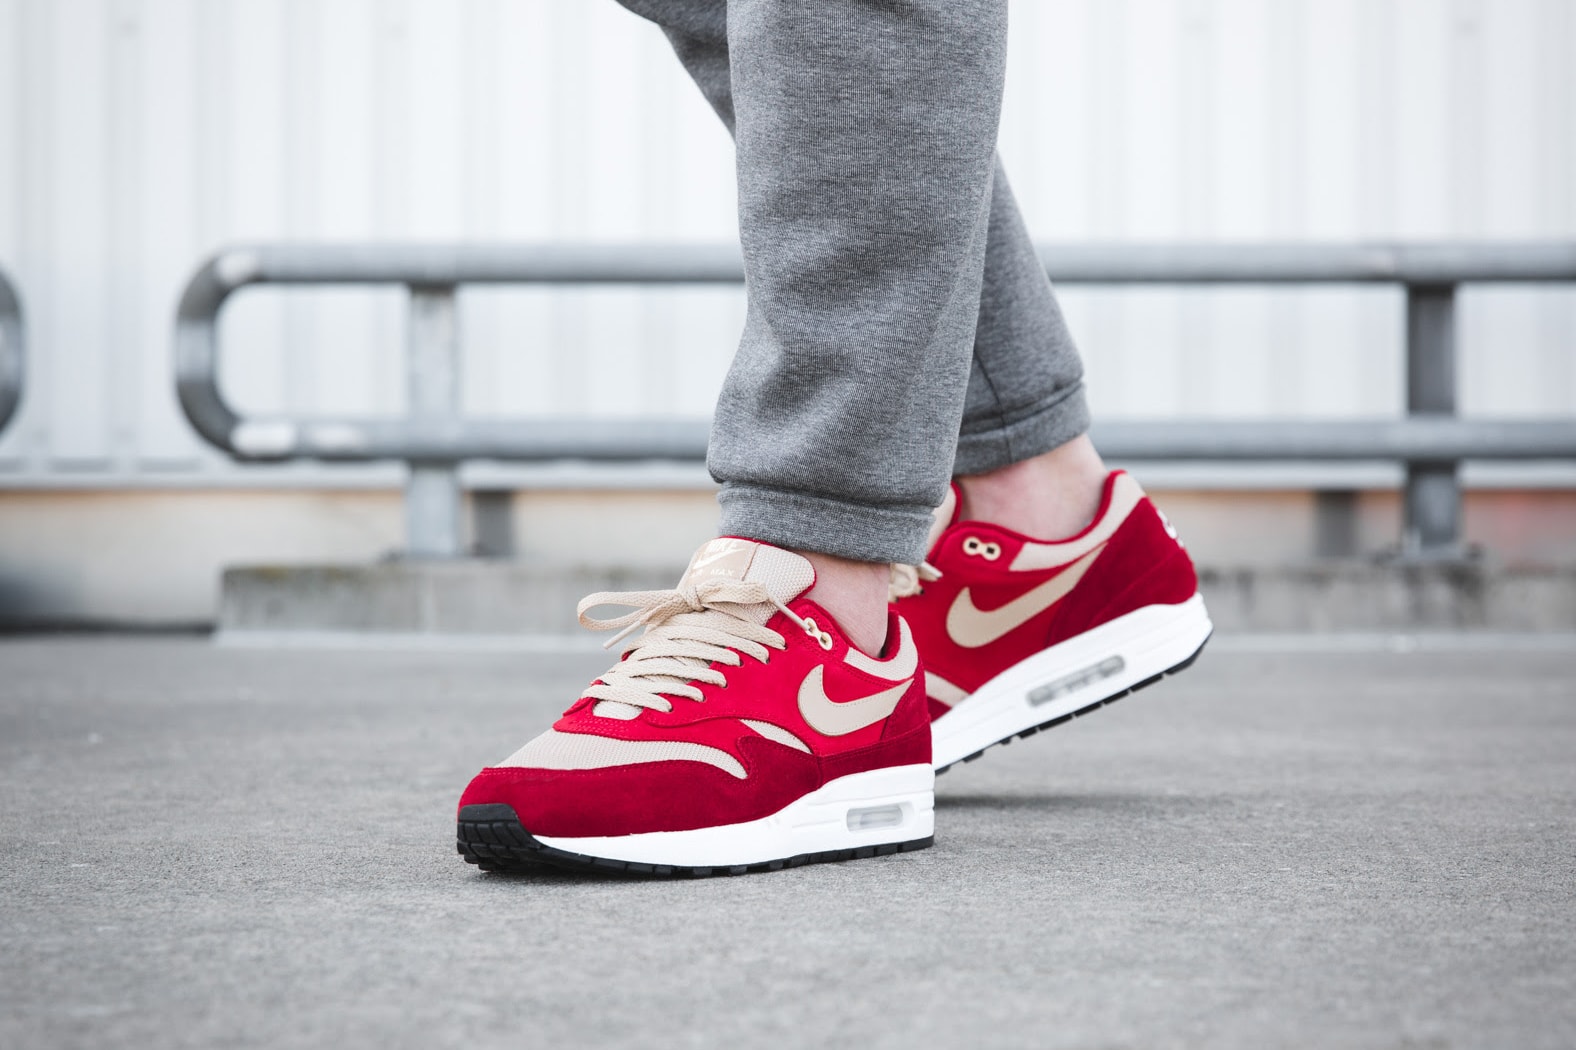 Nike Air Max 1 Curry Pack On-Foot Look